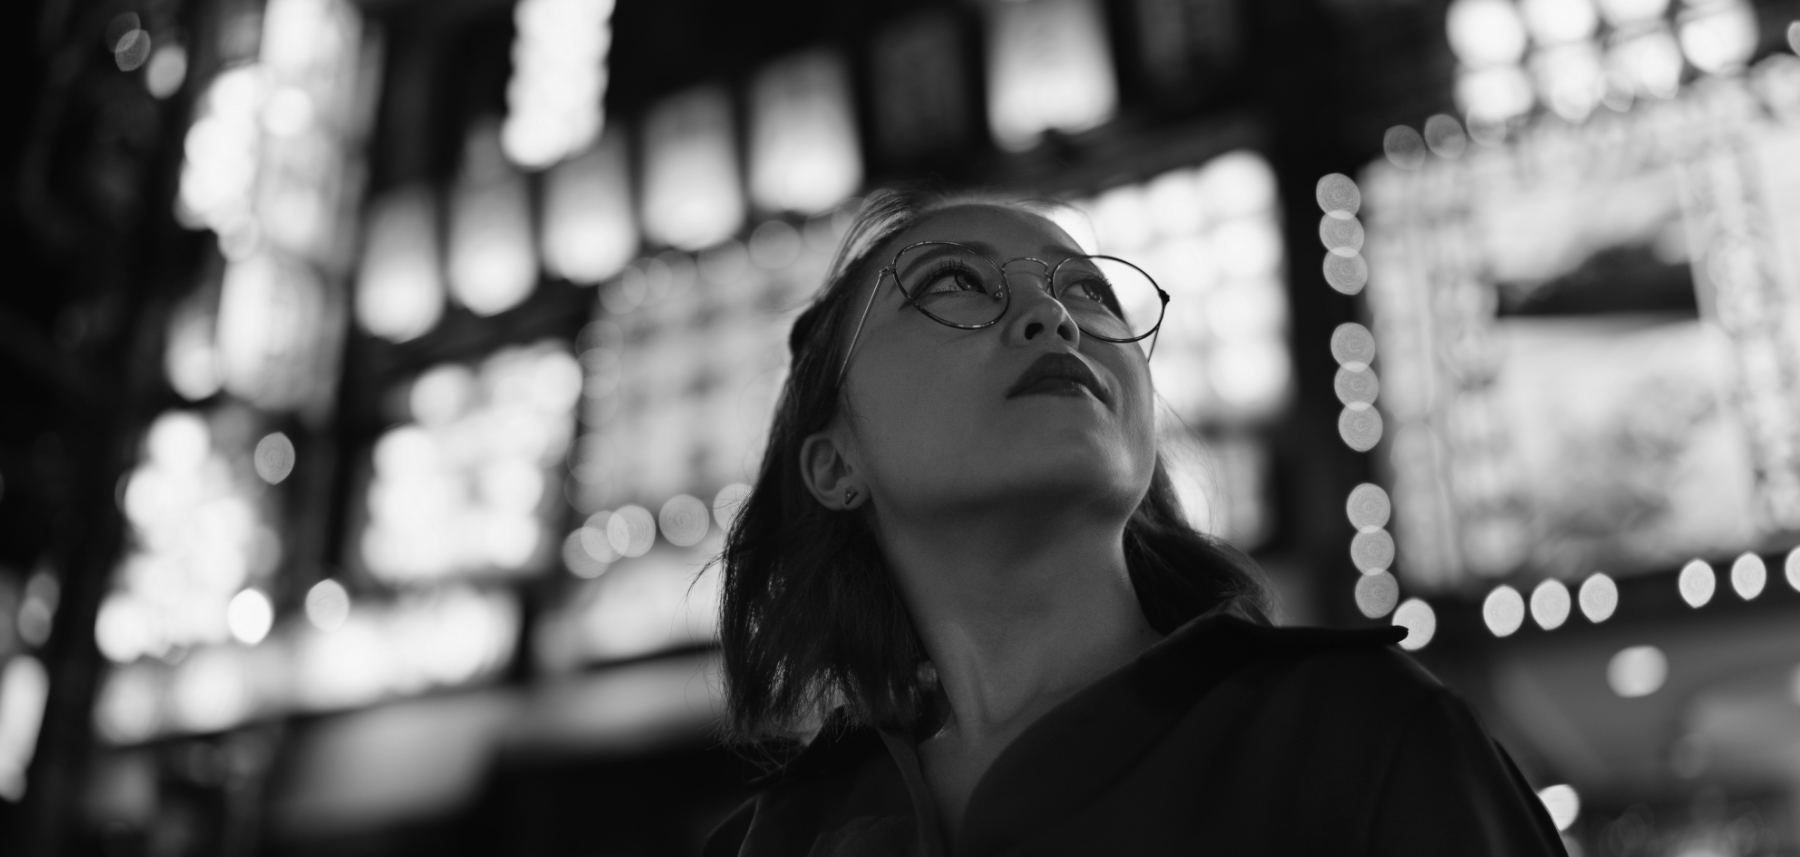 A black and white photo of a woman in glasses looking up.